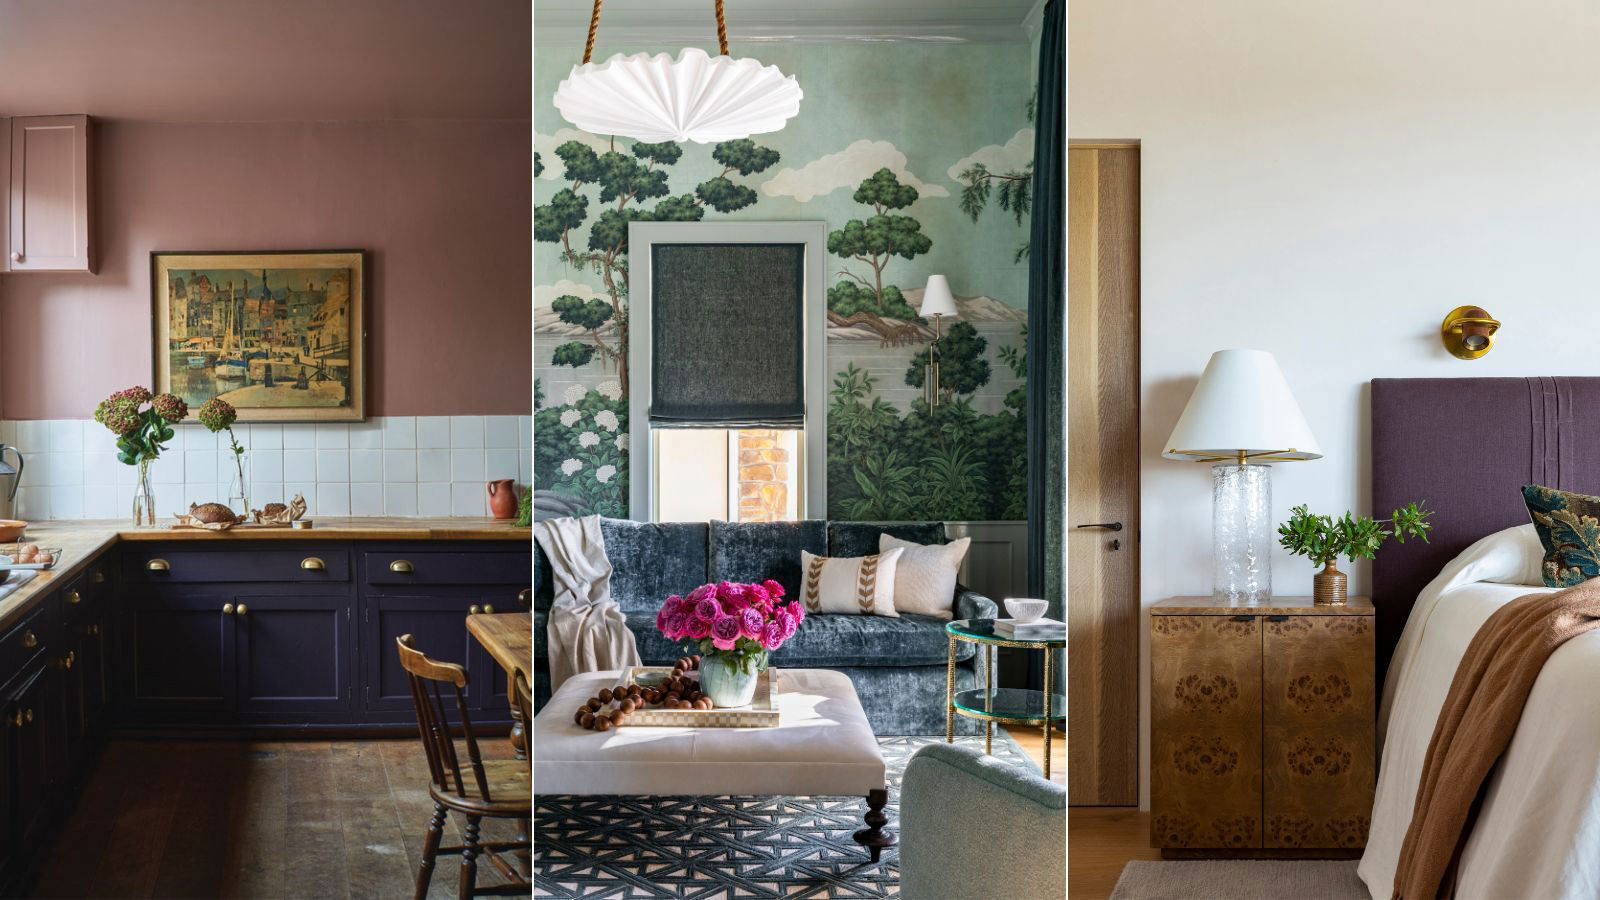 6 ways to decorate with jewel tones to bring intrigue and character to ...